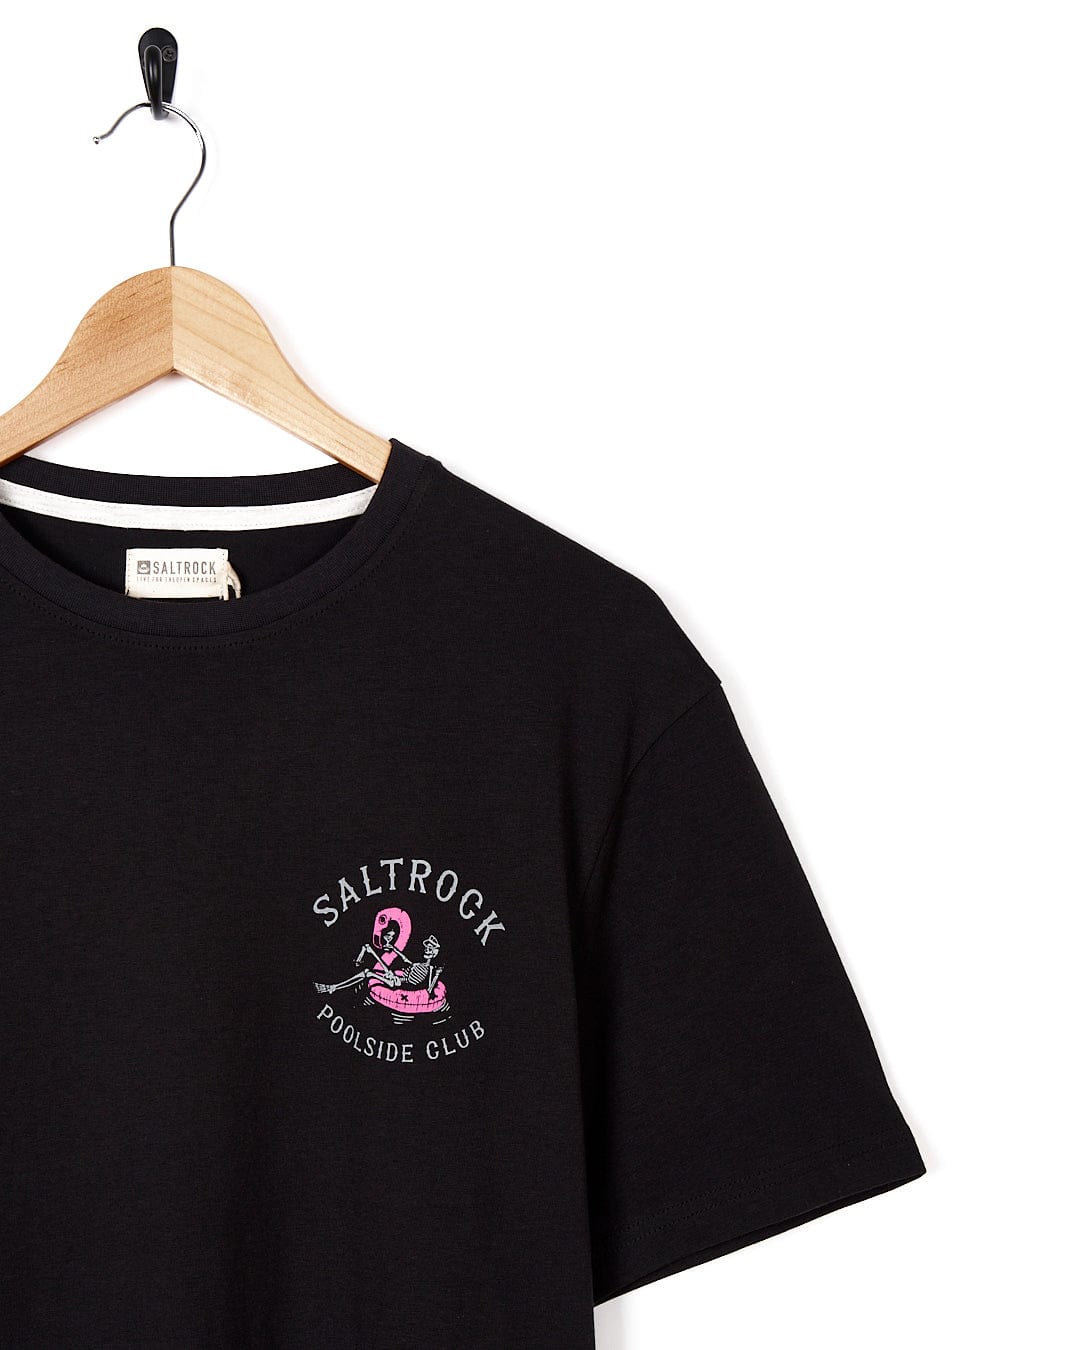 A Poolside - Womens Short Sleeve T-Shirt - Black with a pink logo on it. (Brand: Saltrock)